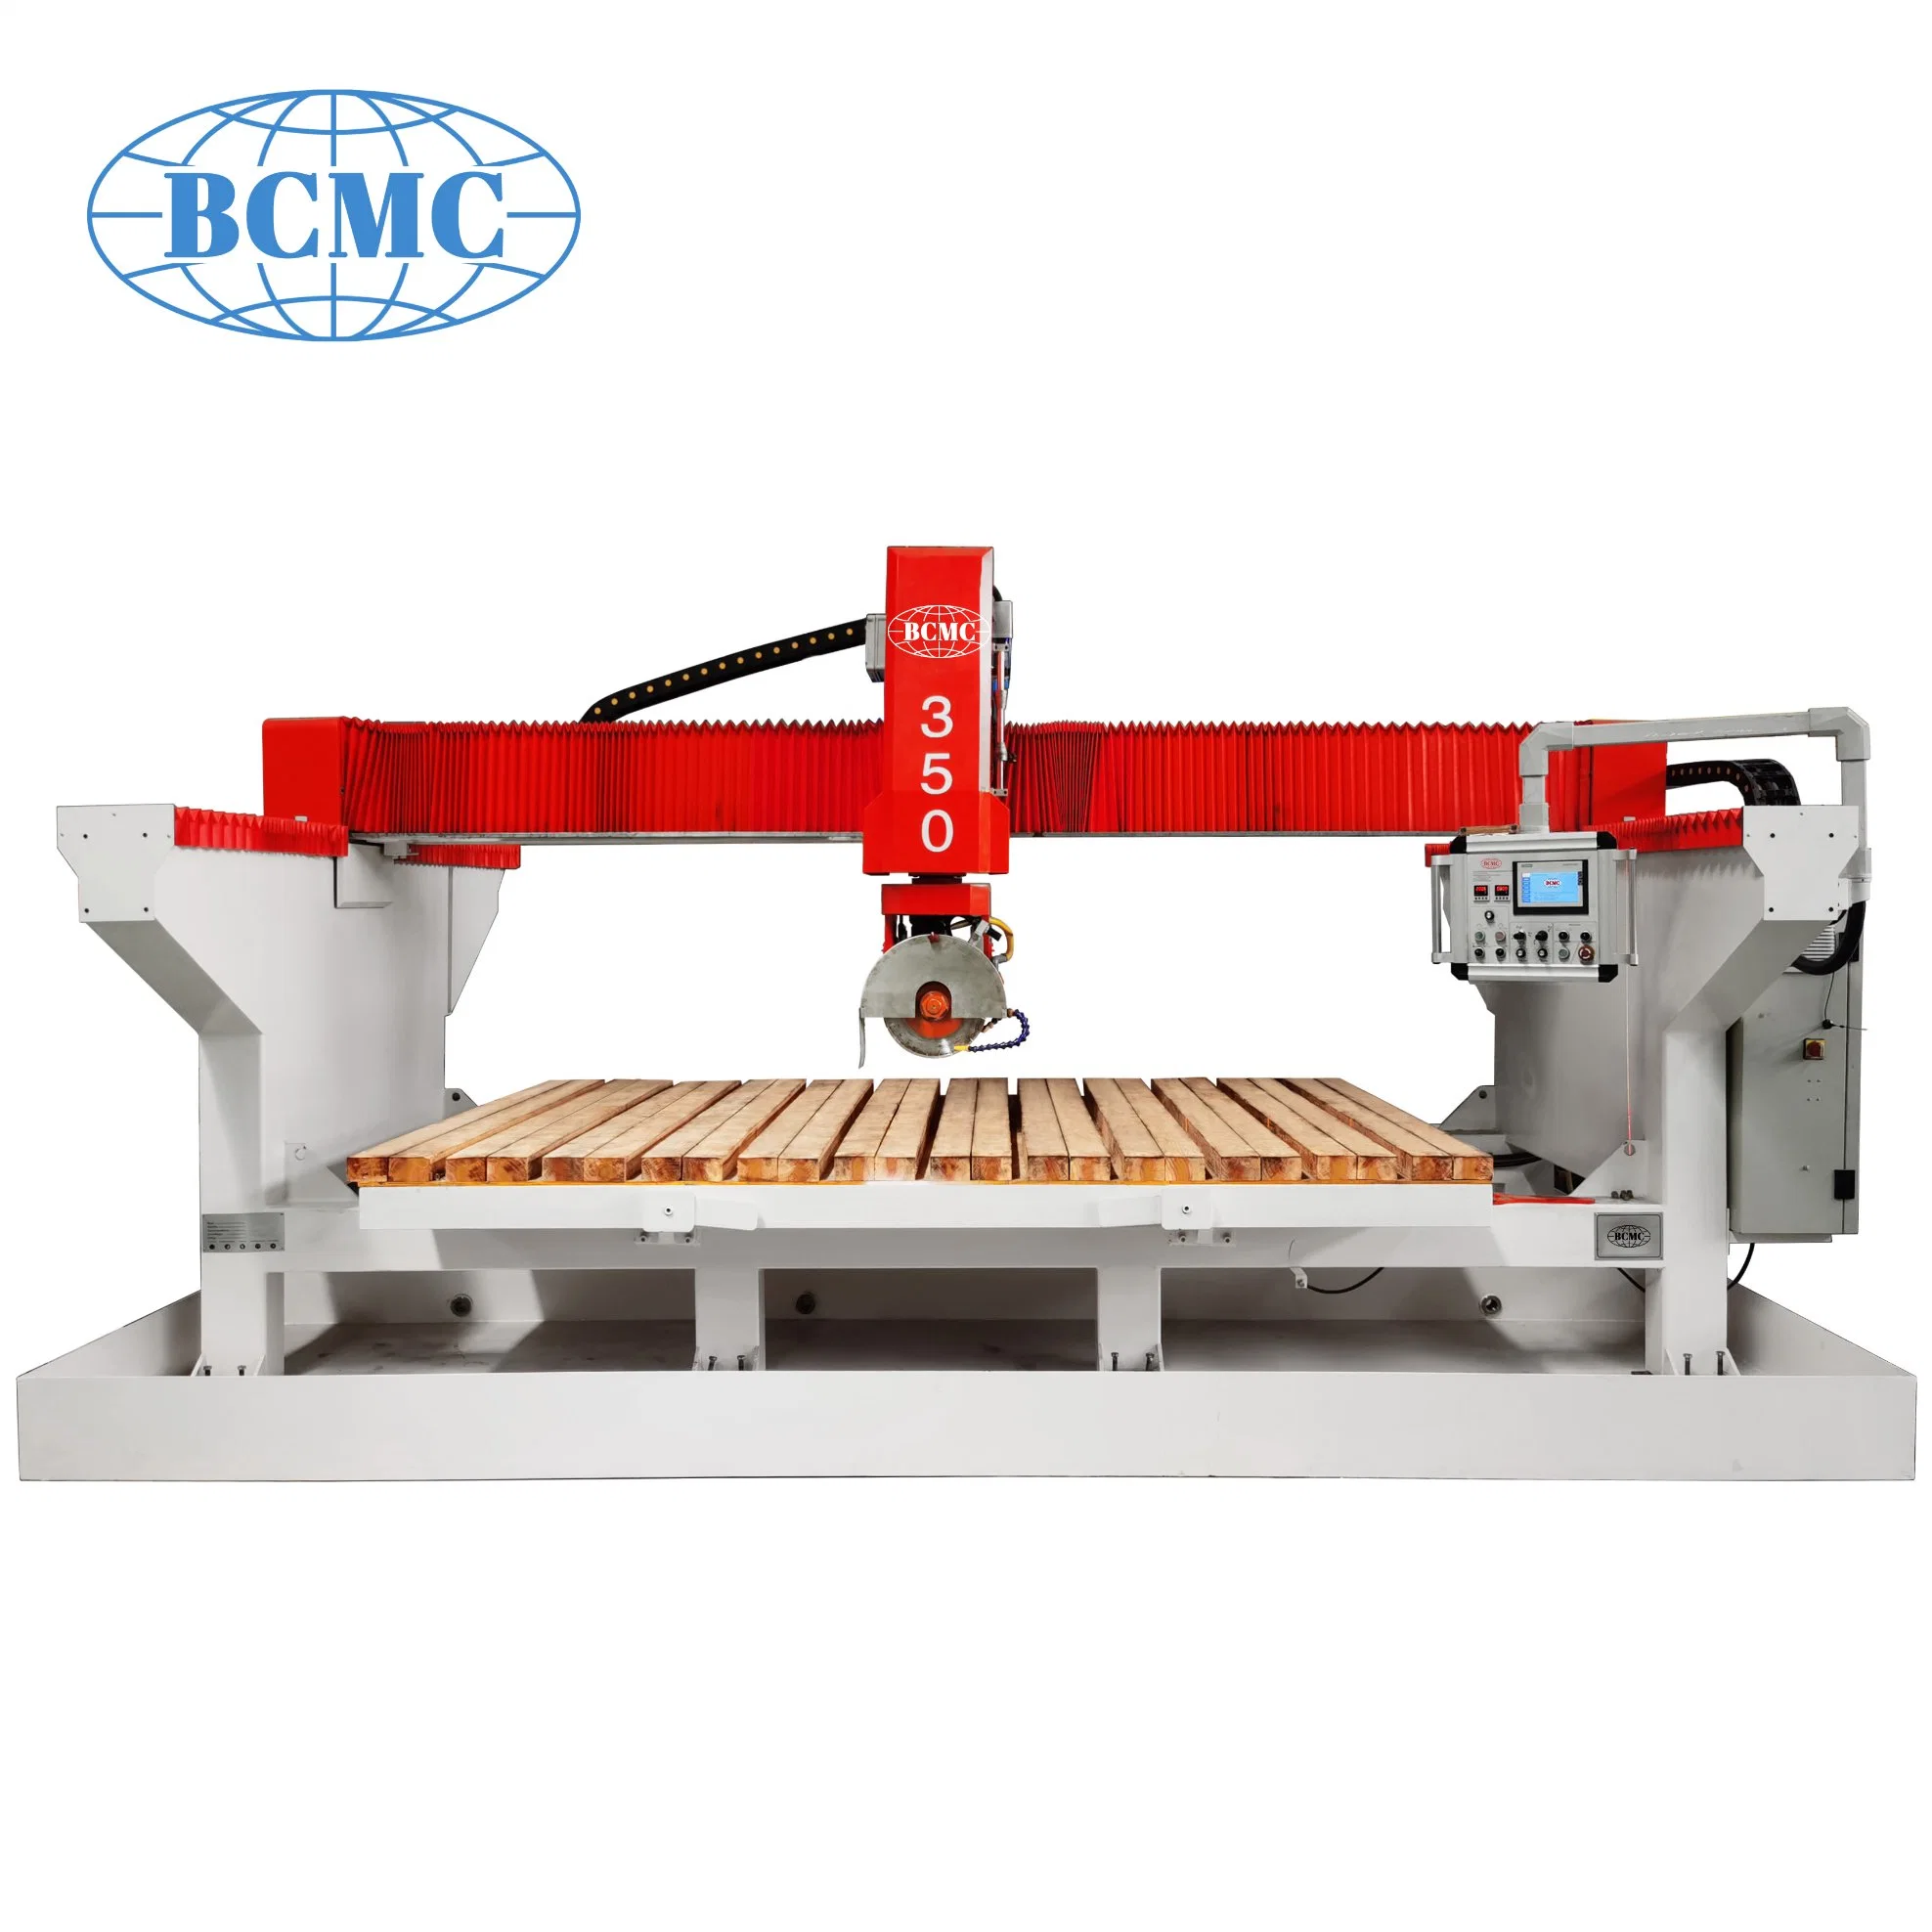 Bcmc PLC System 3 Axis Bridge Saw Stone Cutting Machine Small Type Sintered Stone Processing Equipment Industrial Cutter